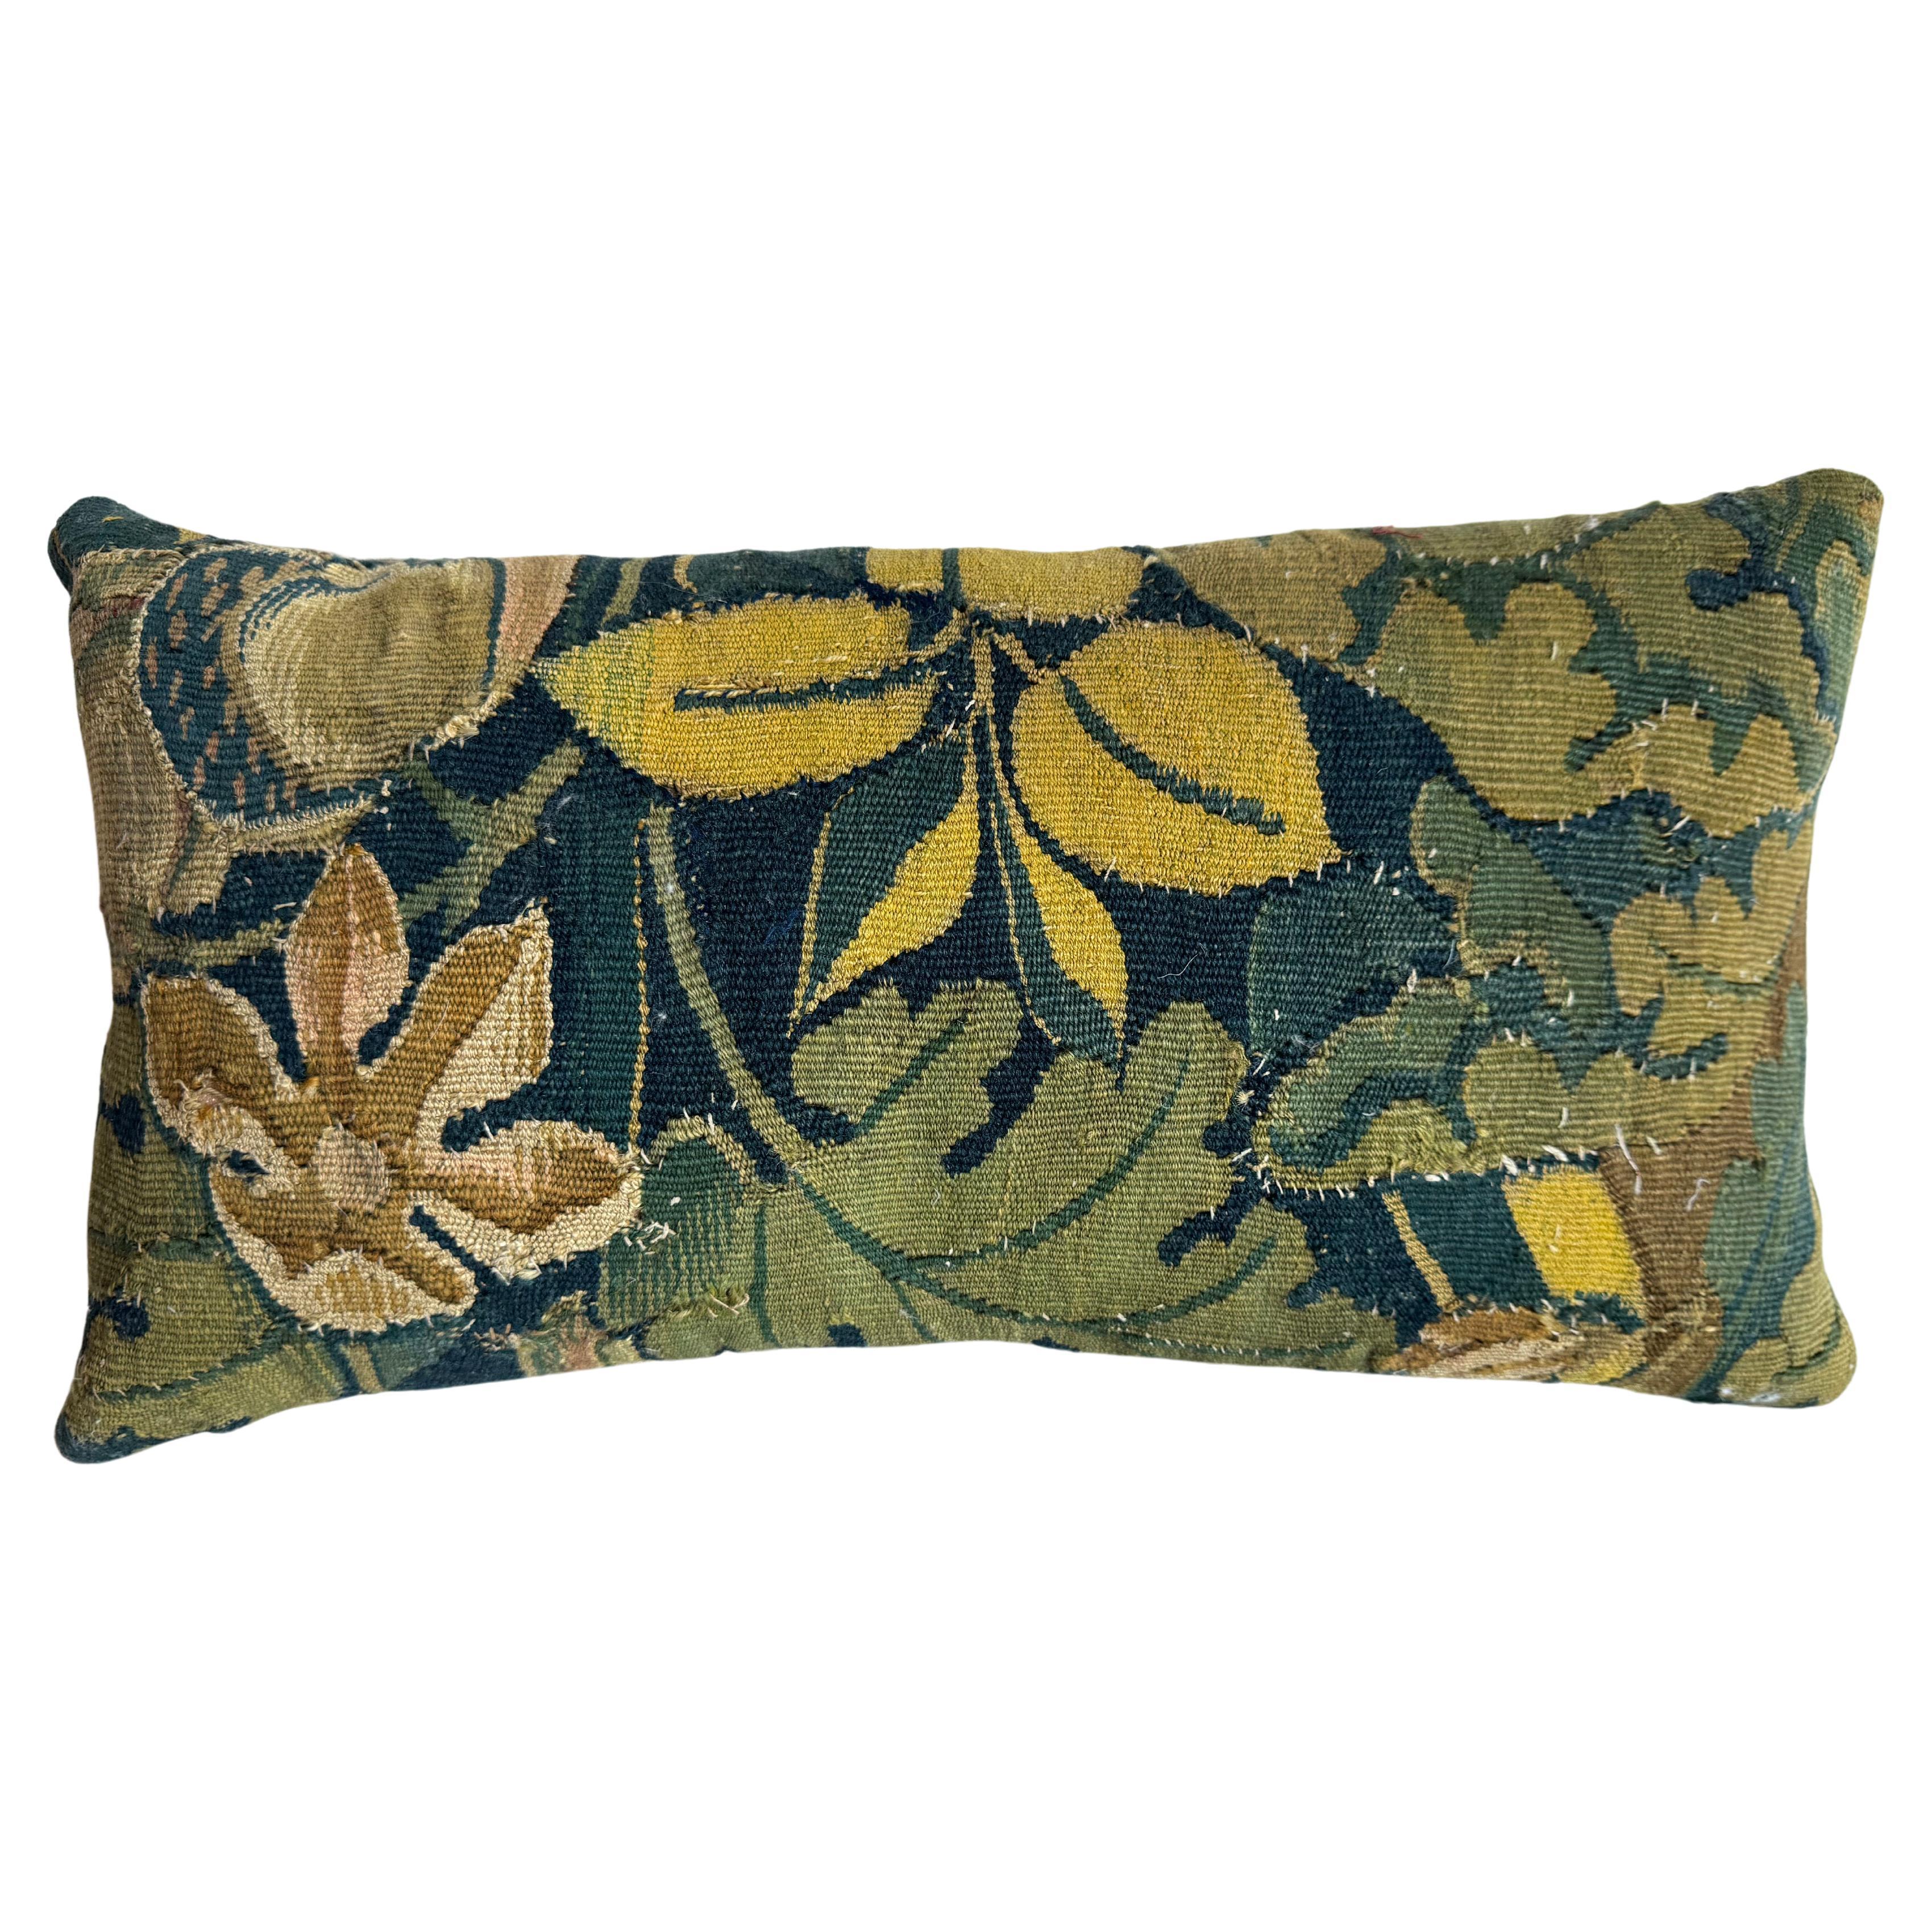  Brussels 16th Century Pillow - 19" X 10" For Sale